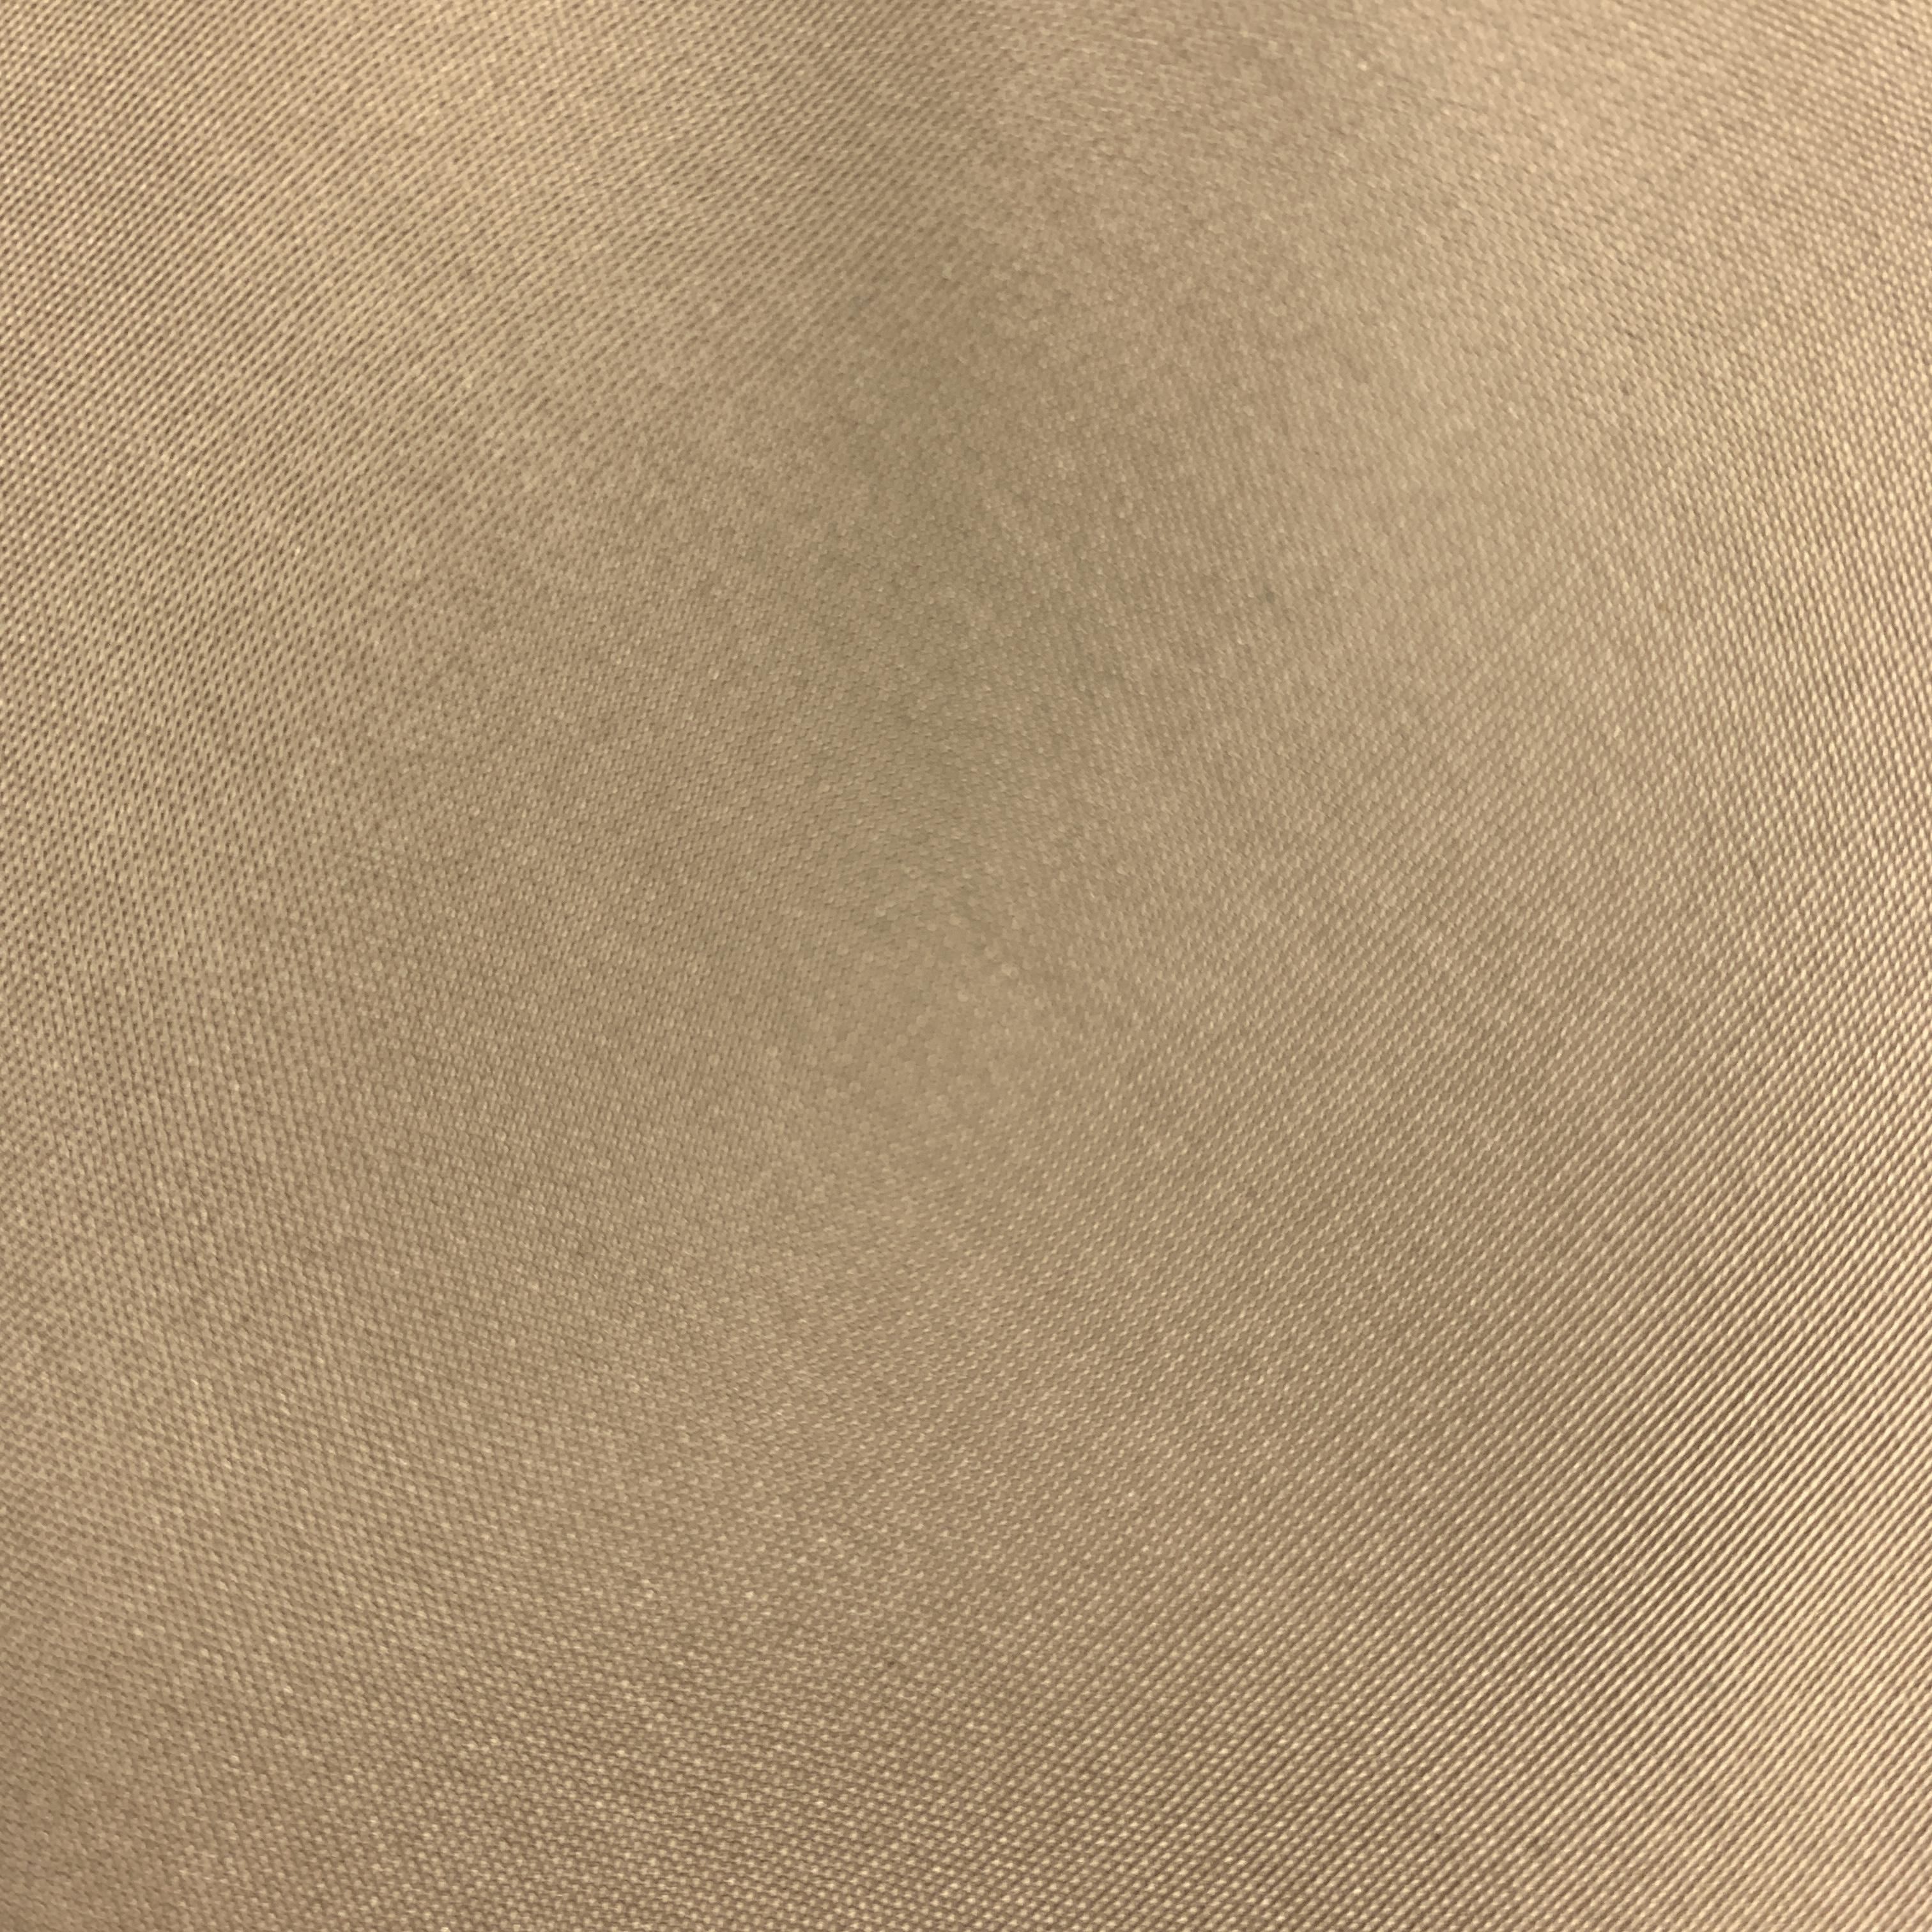 HELMUT LANG Solid Khaki Beige Silk Tie In Excellent Condition In San Francisco, CA